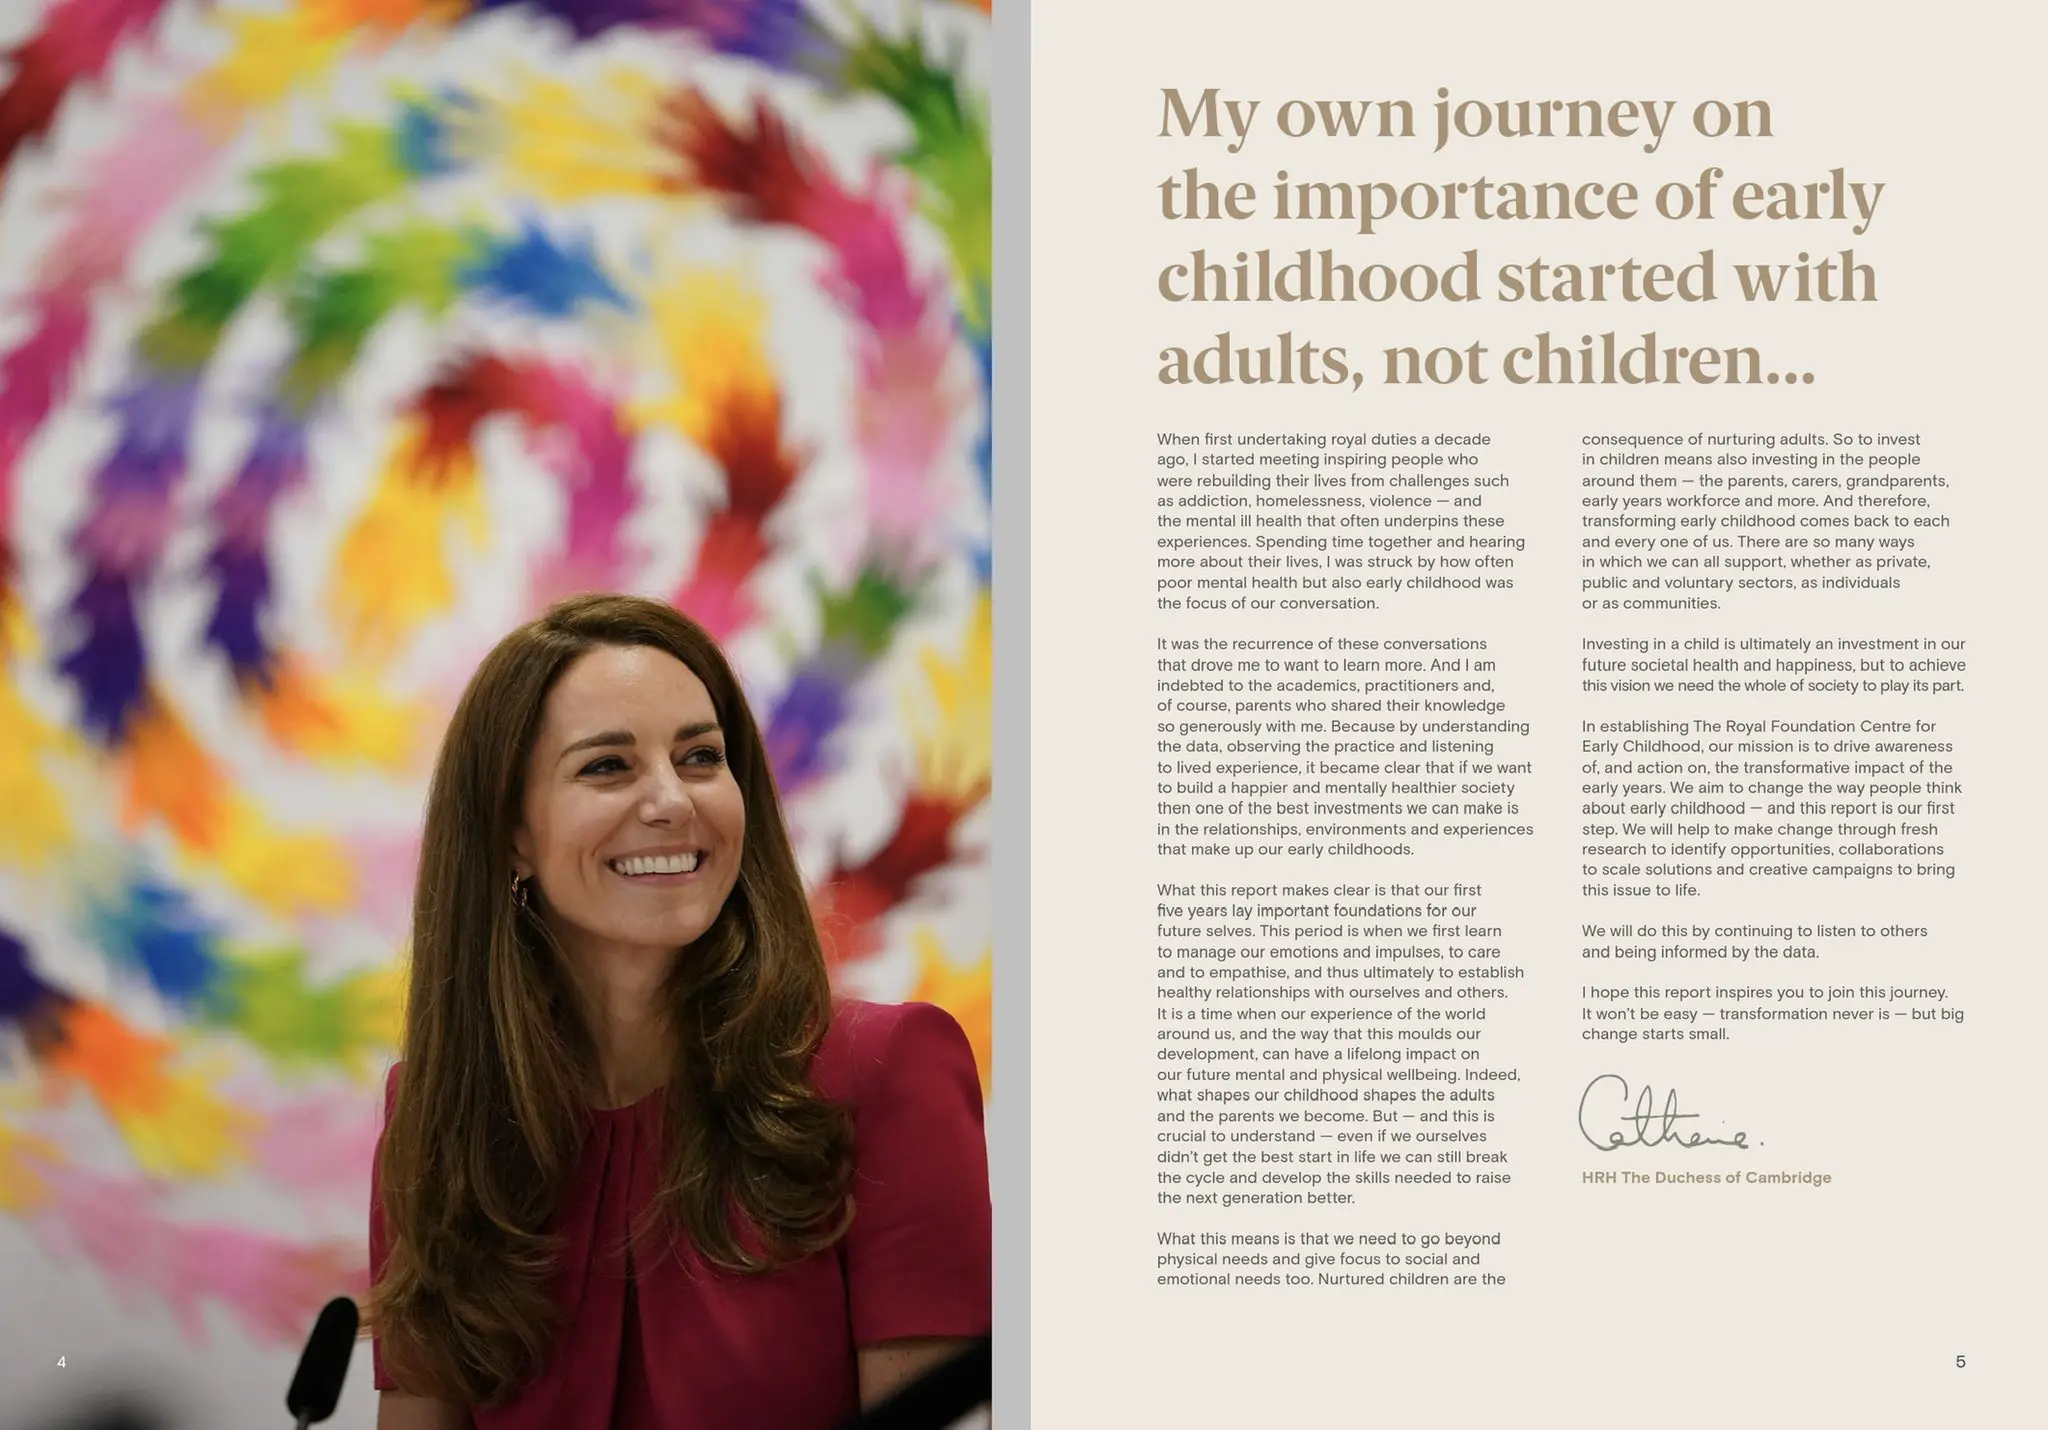 The Duchess of Cambridge wrote a forward in the first report of The Royal Foundation Centre for Early Childhood